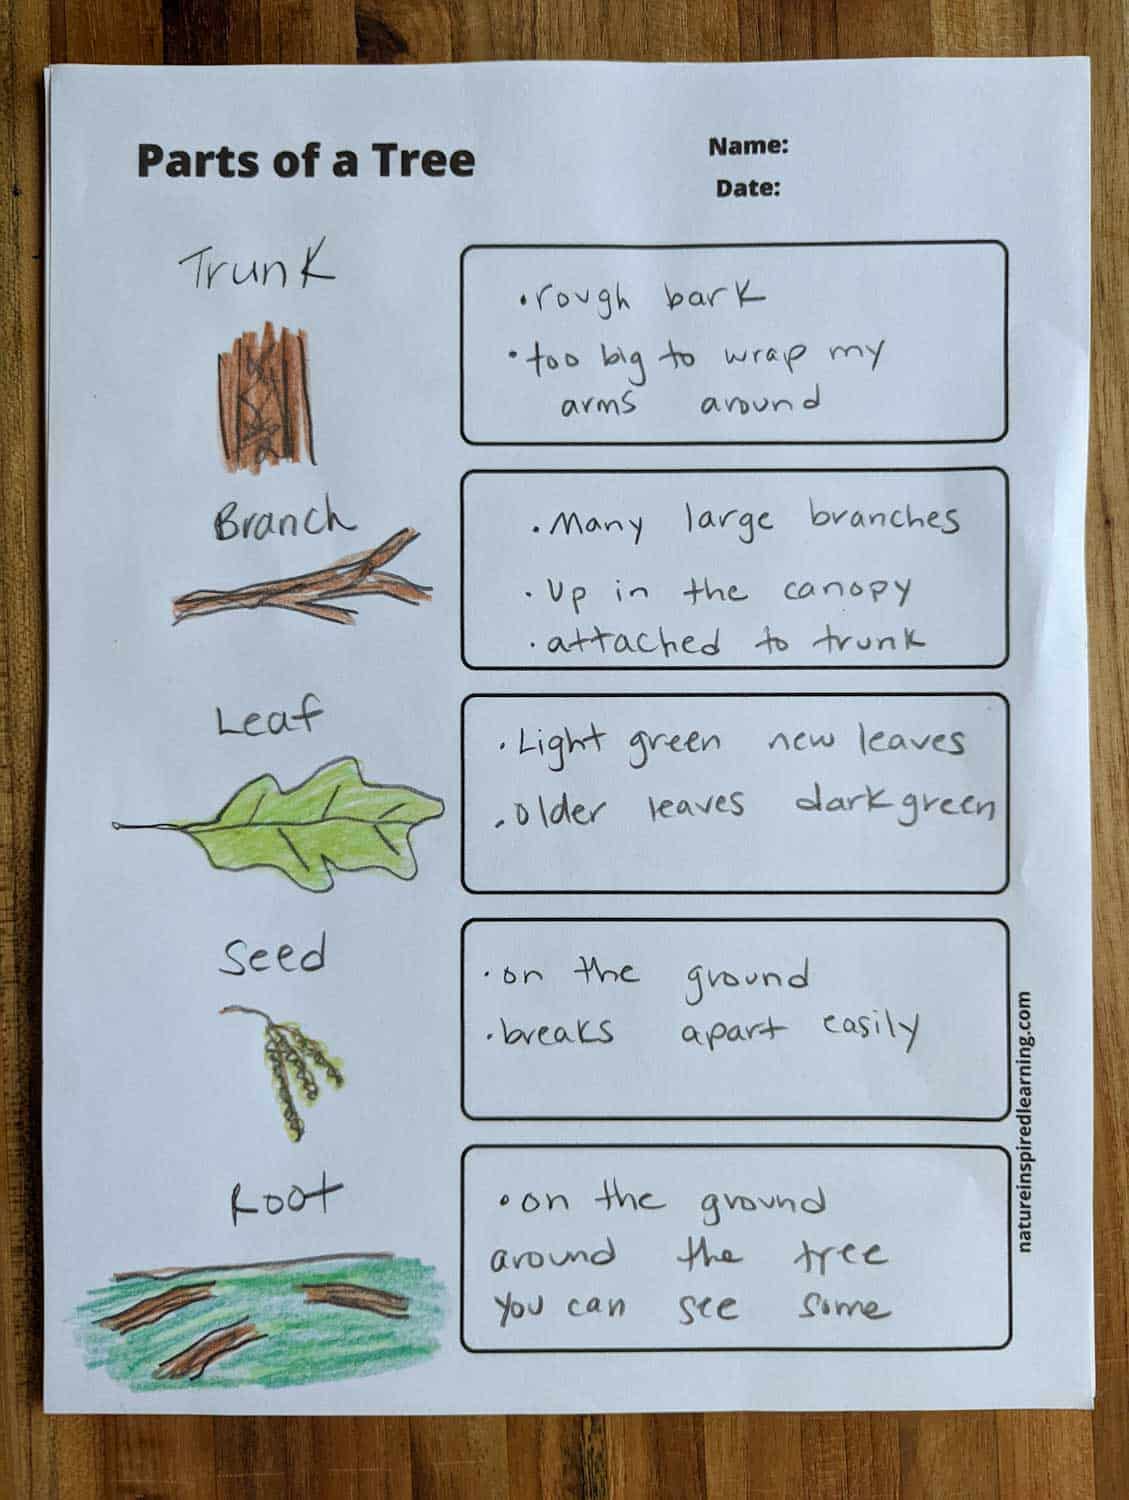 filled out parts of a tree worksheet with the five parts written in words and illustrations along with descriptions on a wooden board